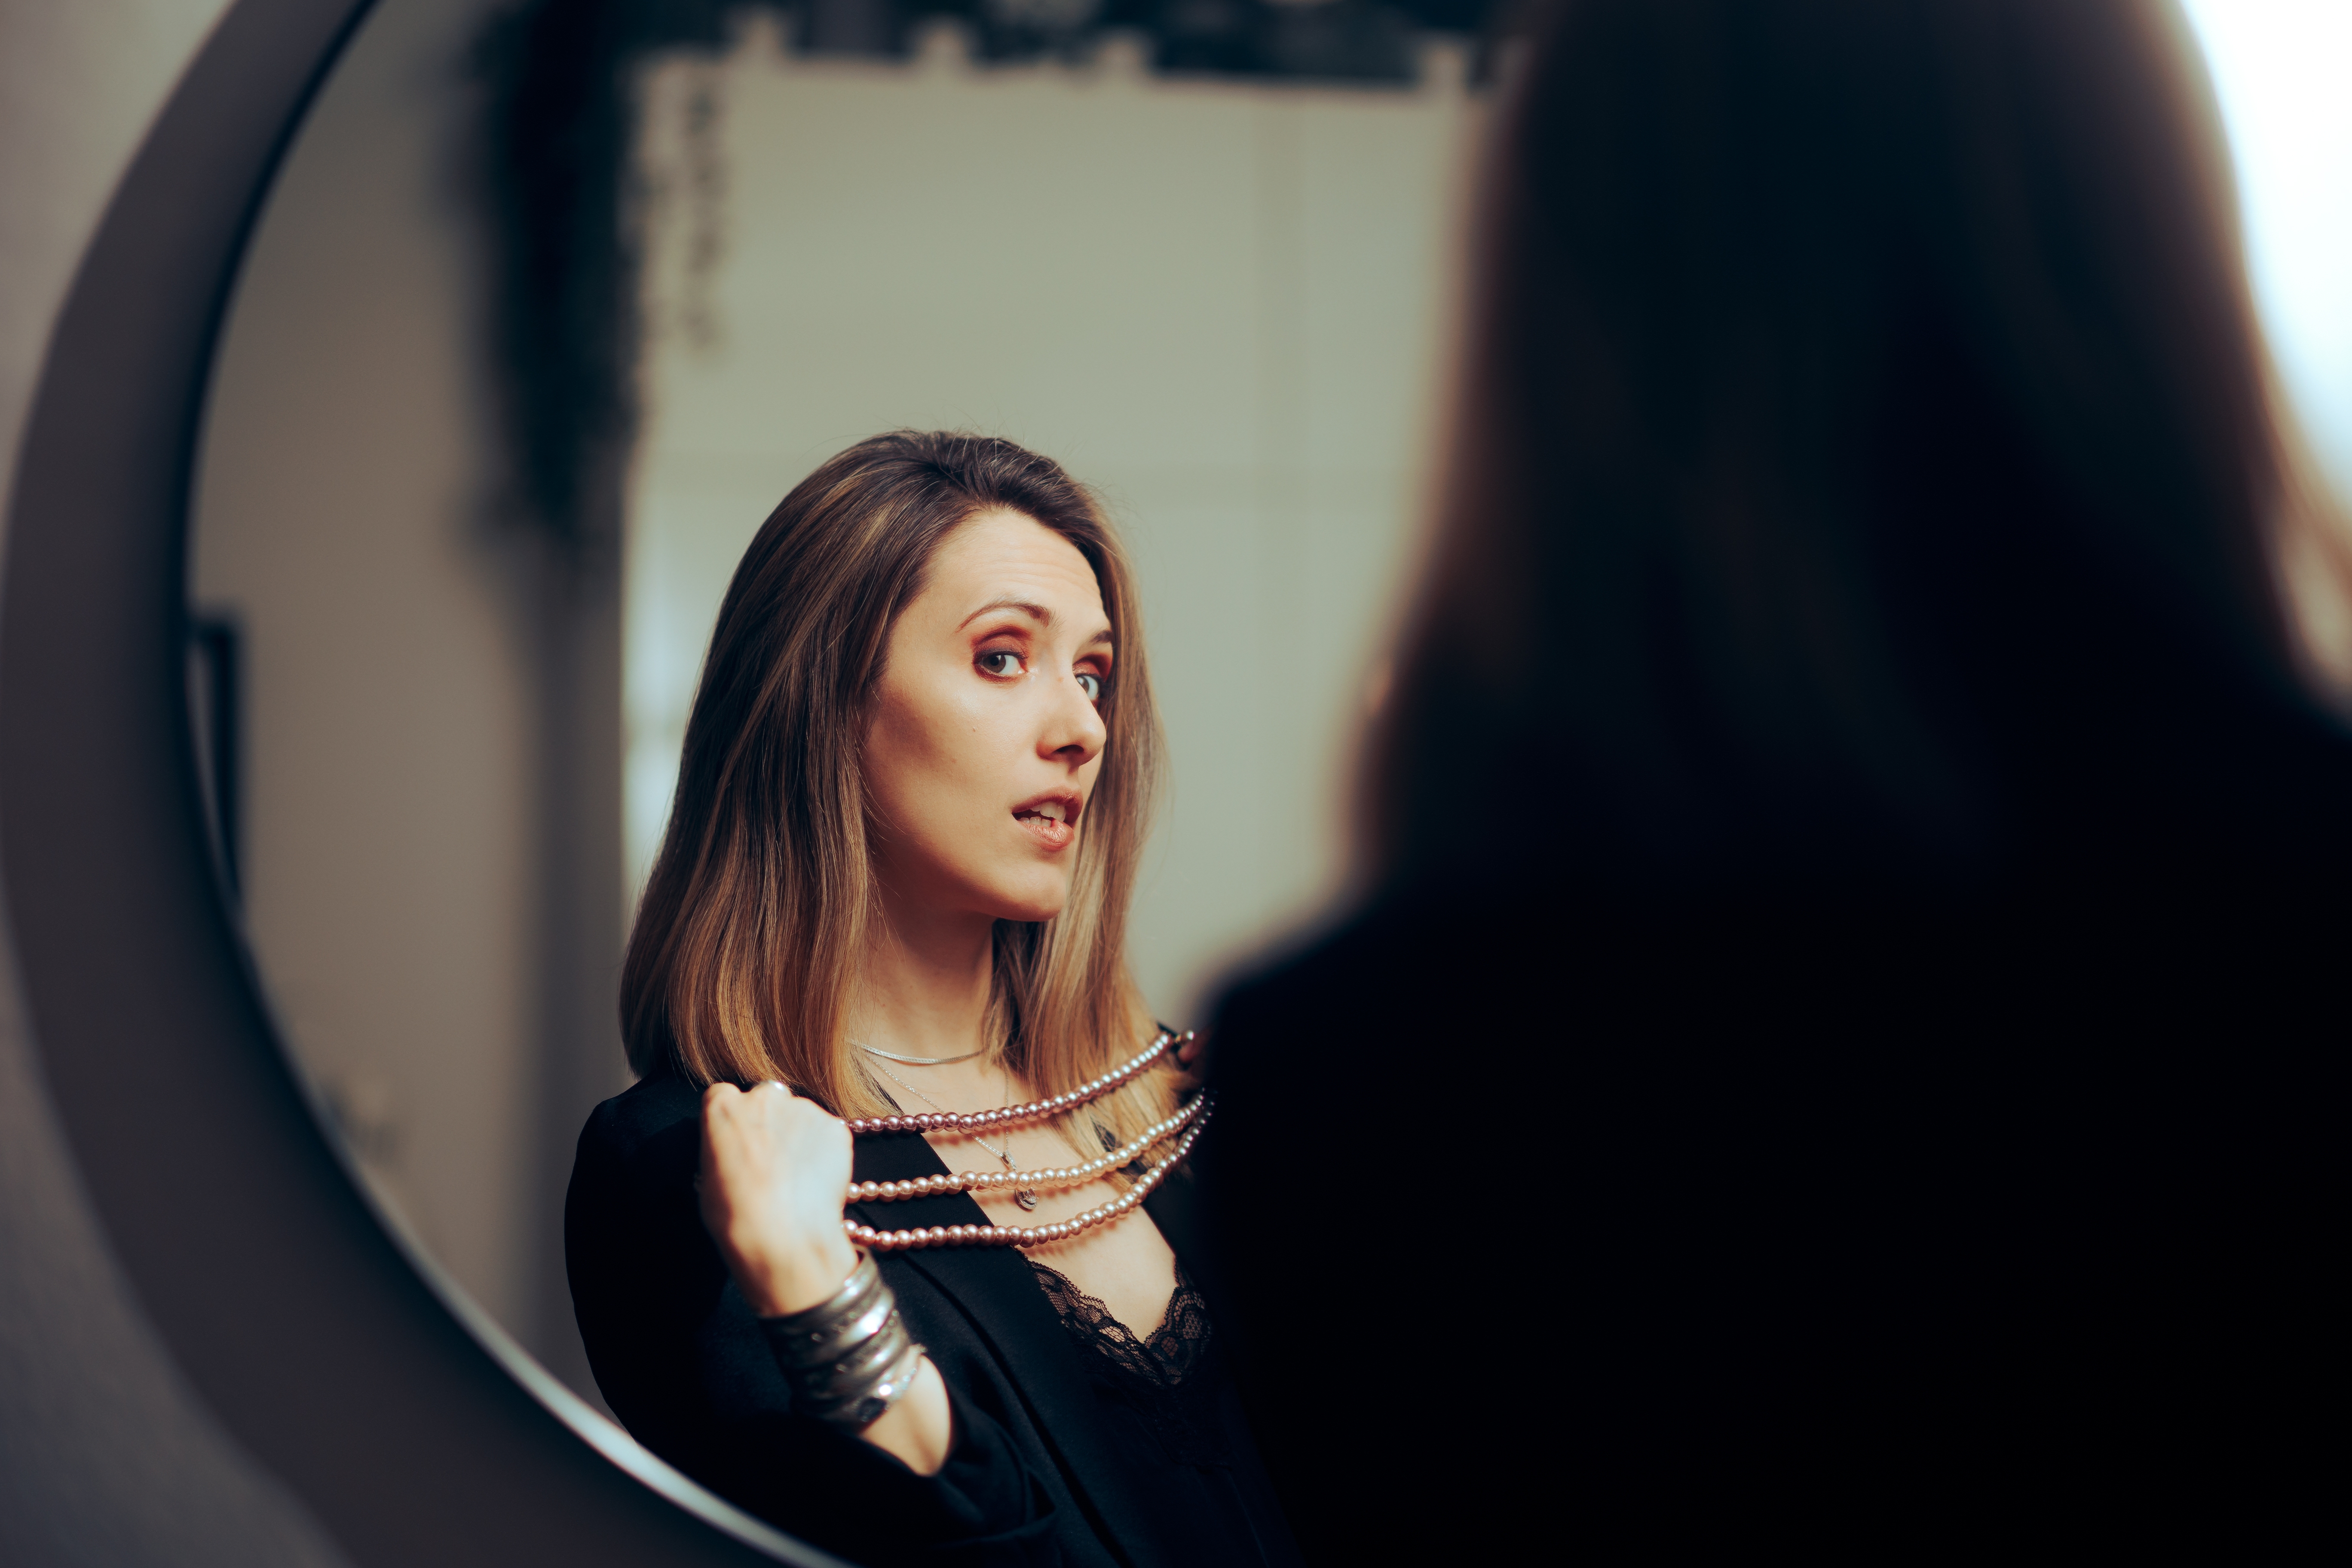 A woman looking in the mirror. | Source: Shutterstock